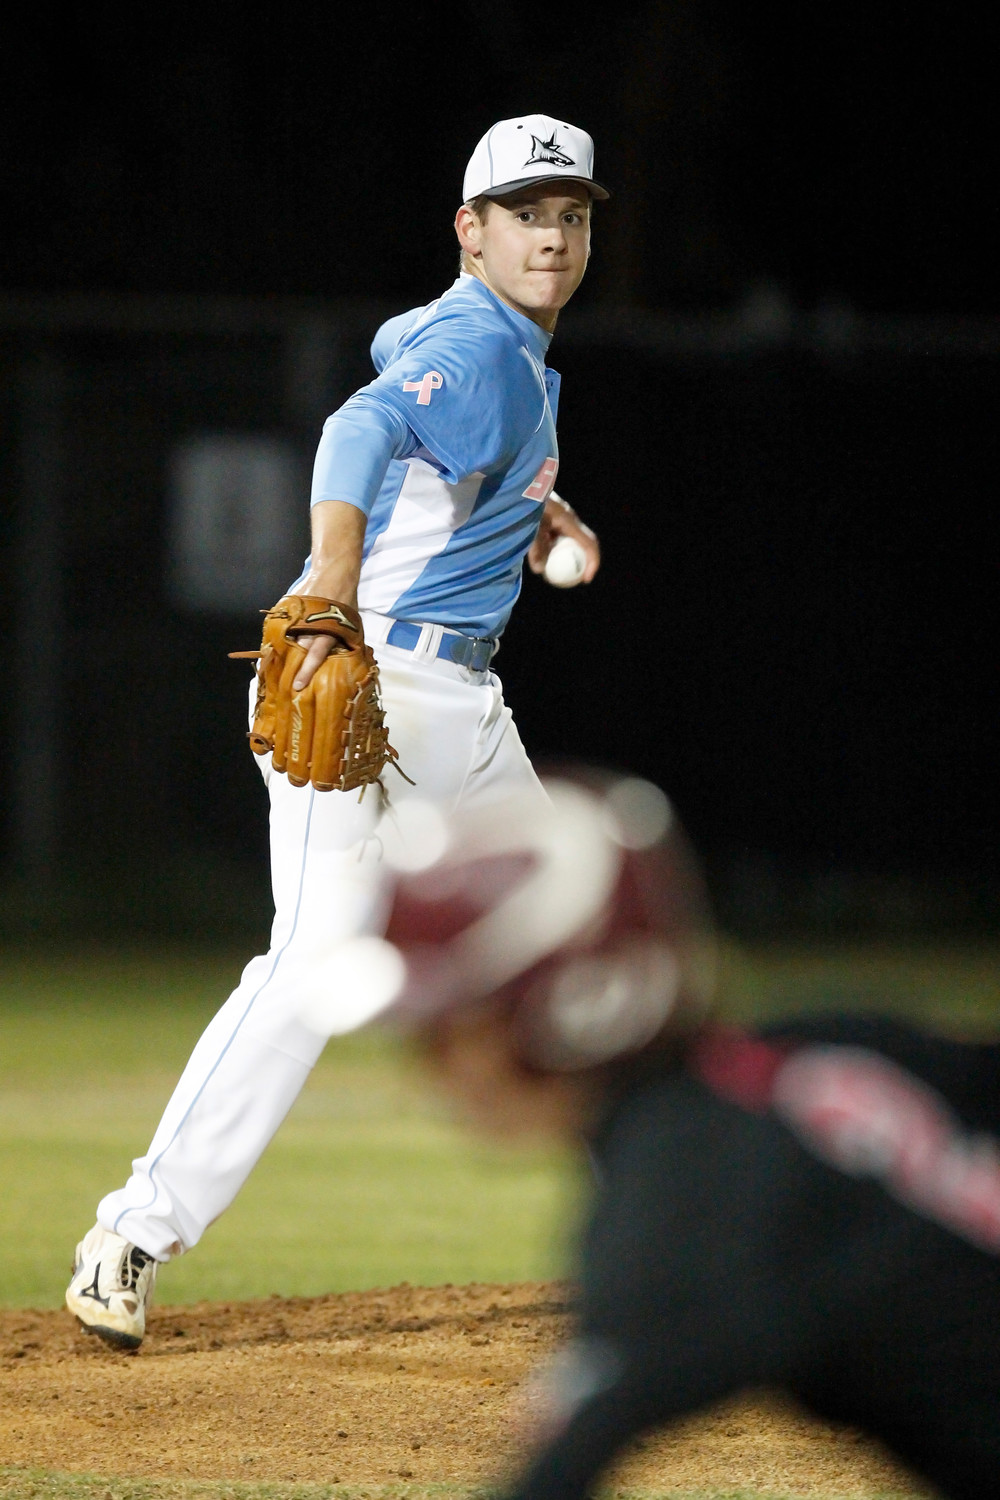 Ponte Vedra pitcher Tony Roca keeps the Episcopal base runner close as he prepares to throw.